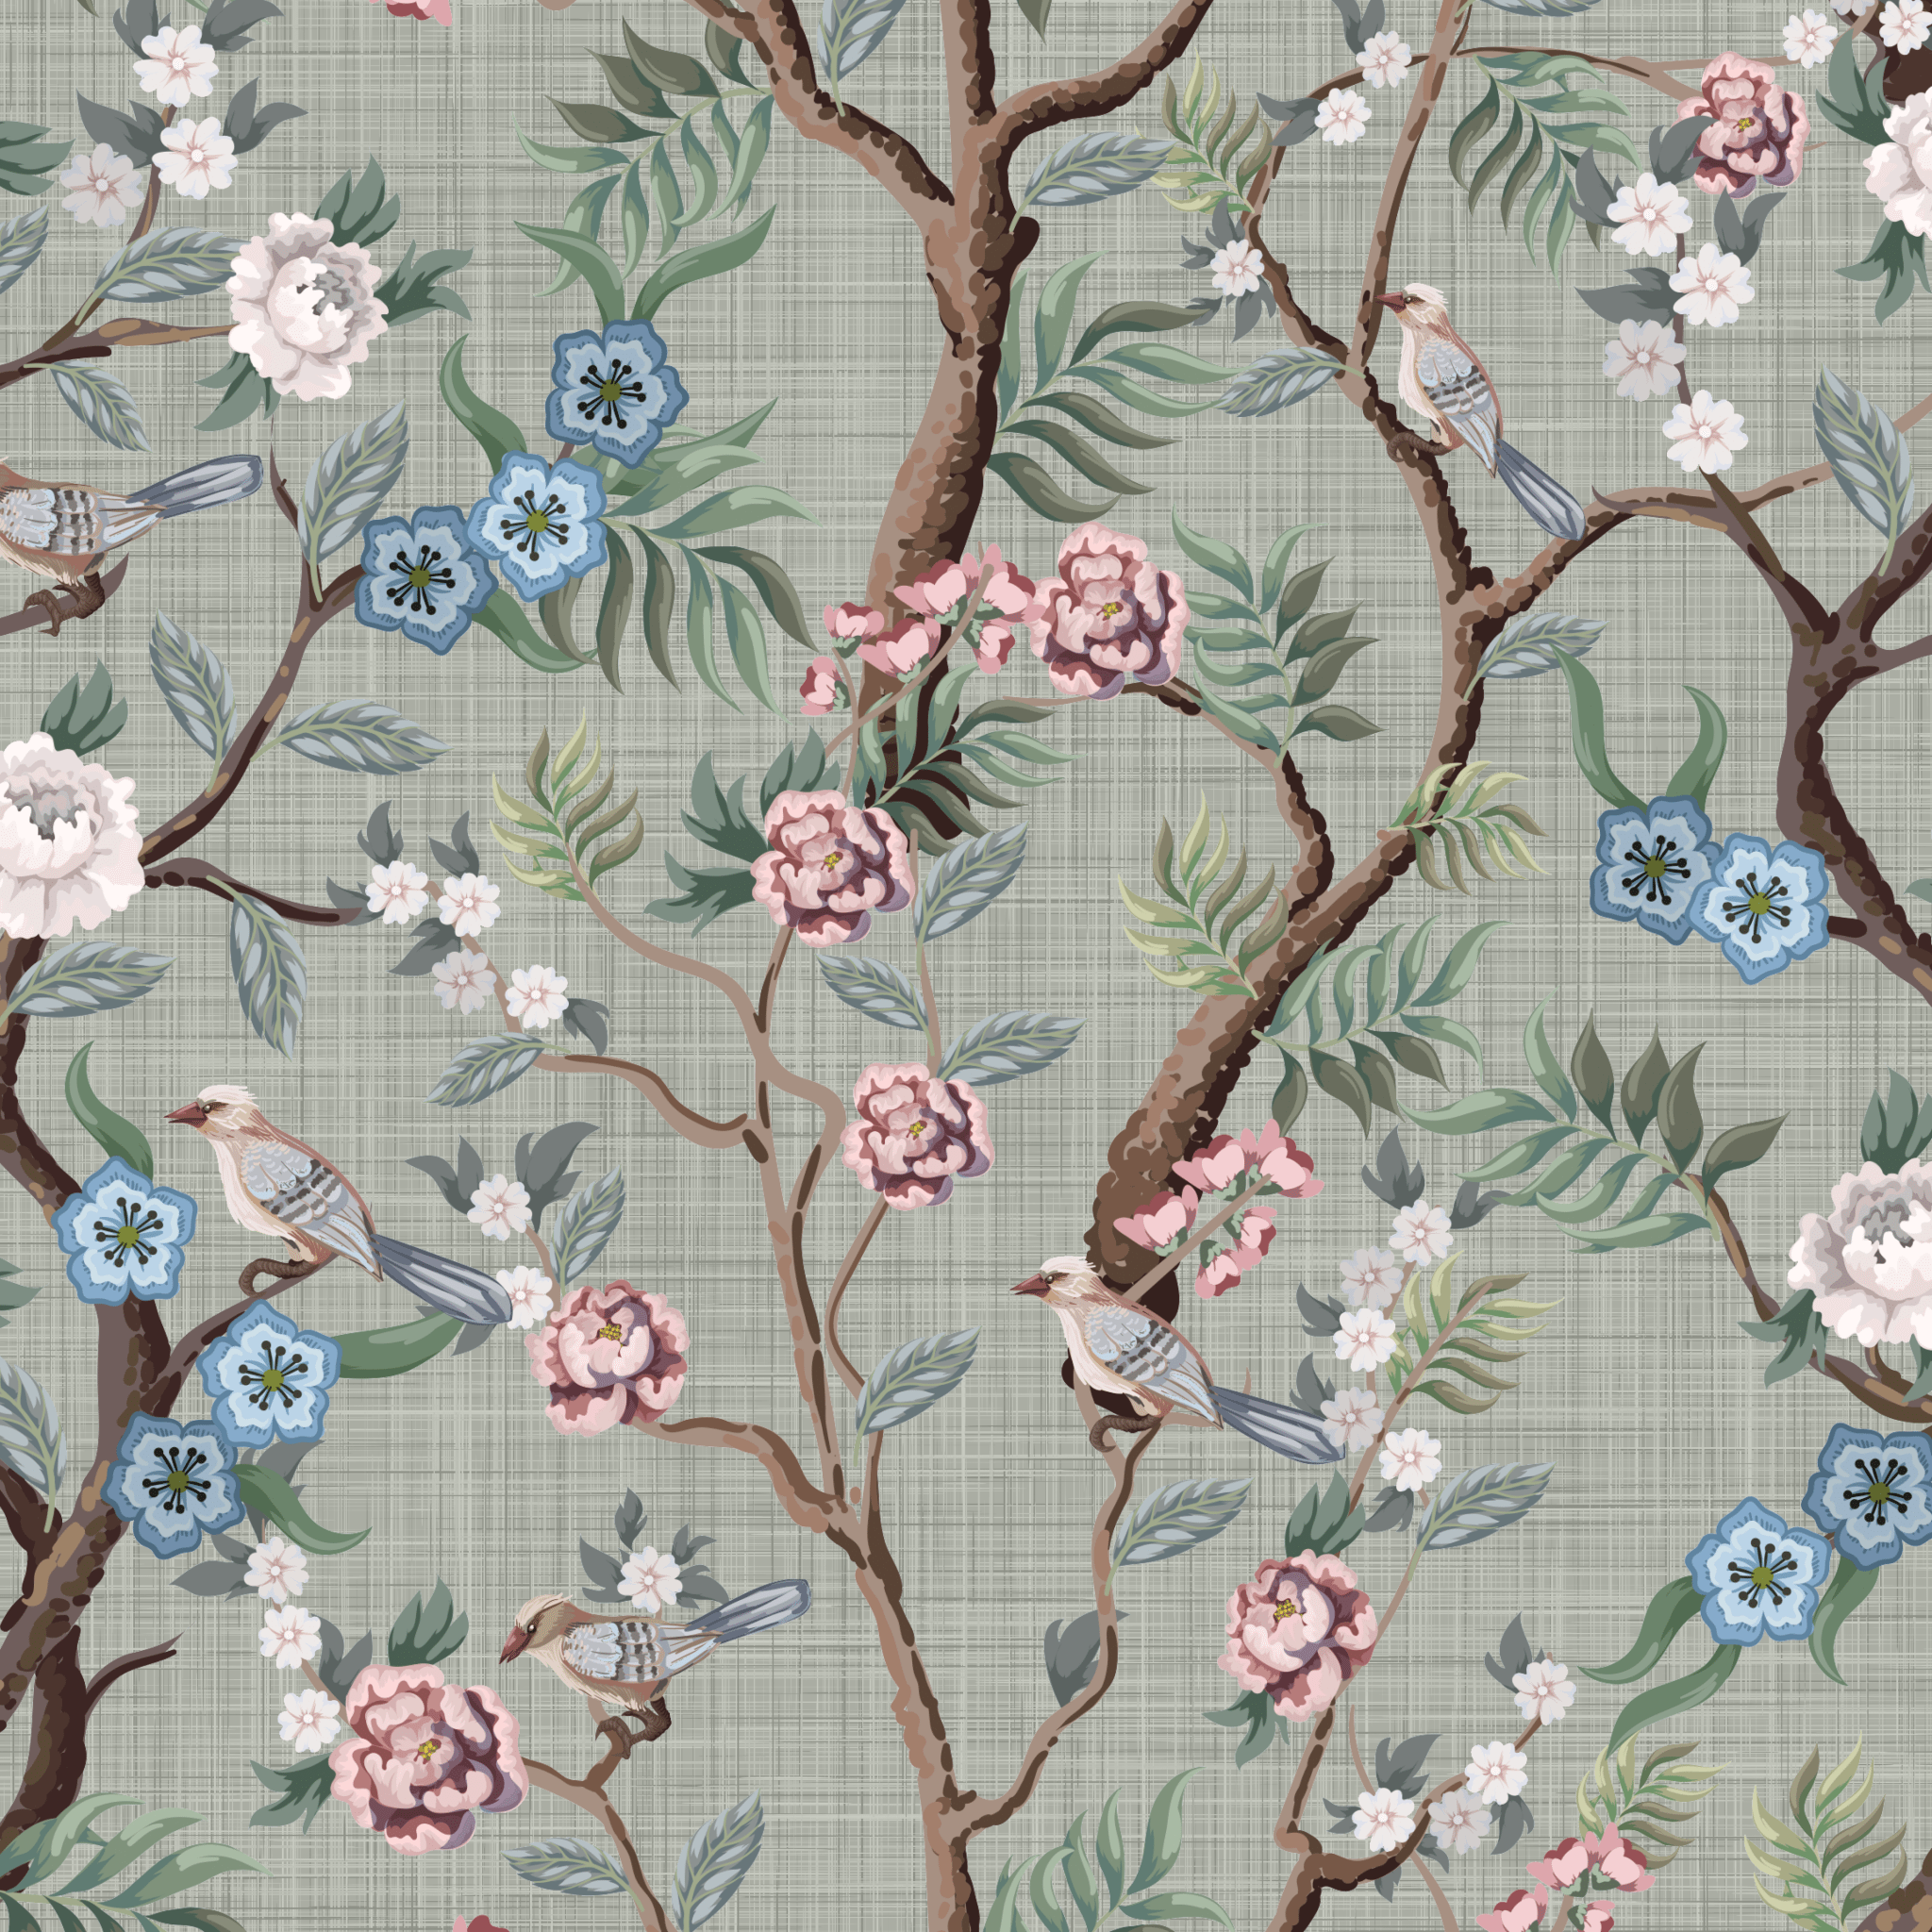 Wallpaper sample featuring chinoiserie design over grasscloth background